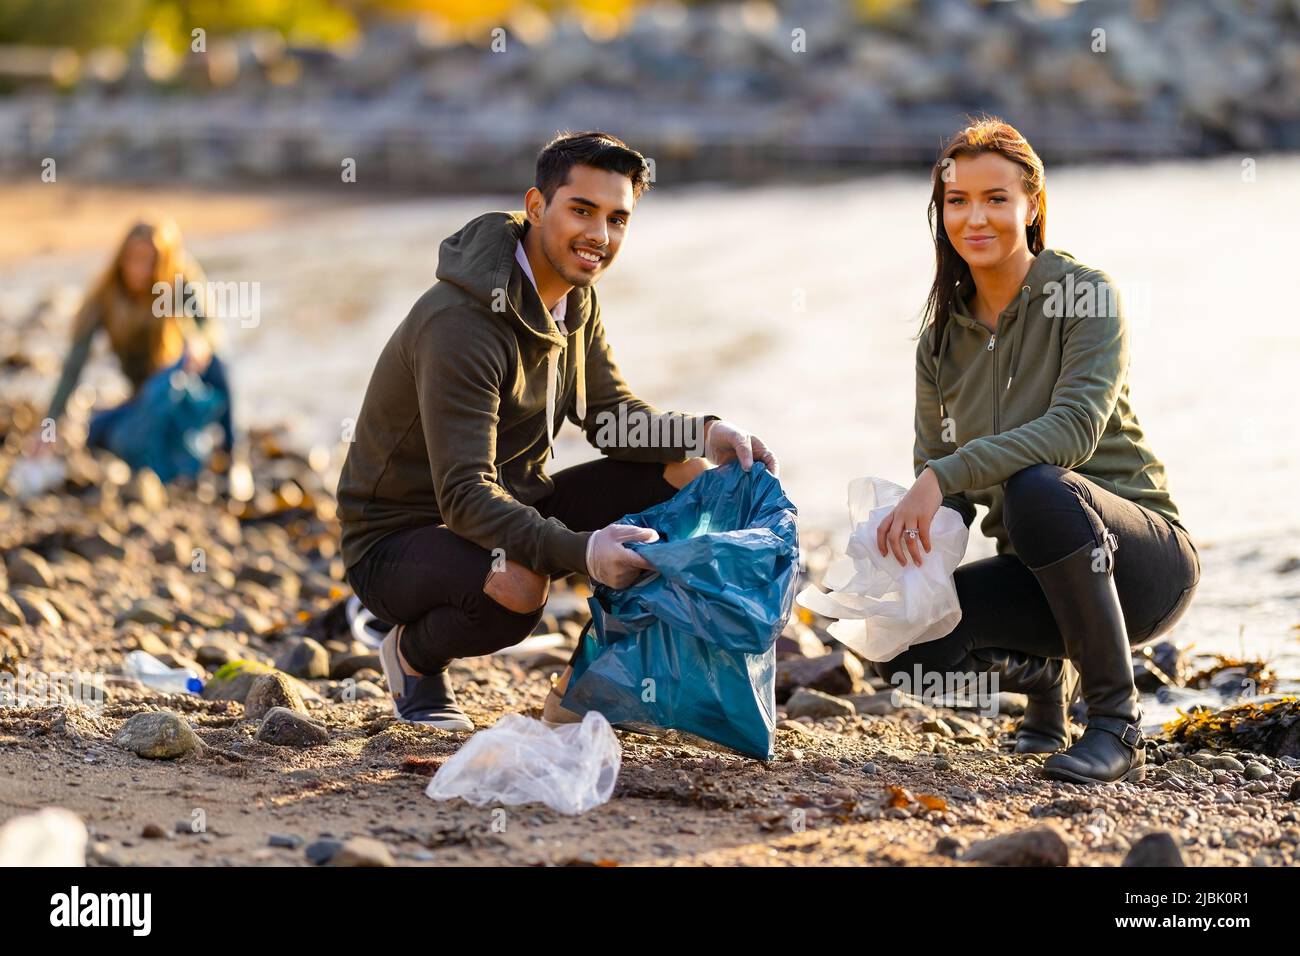 Team of dedicated and smiling volunteers collecting plastic garbage at beach Stock Photo